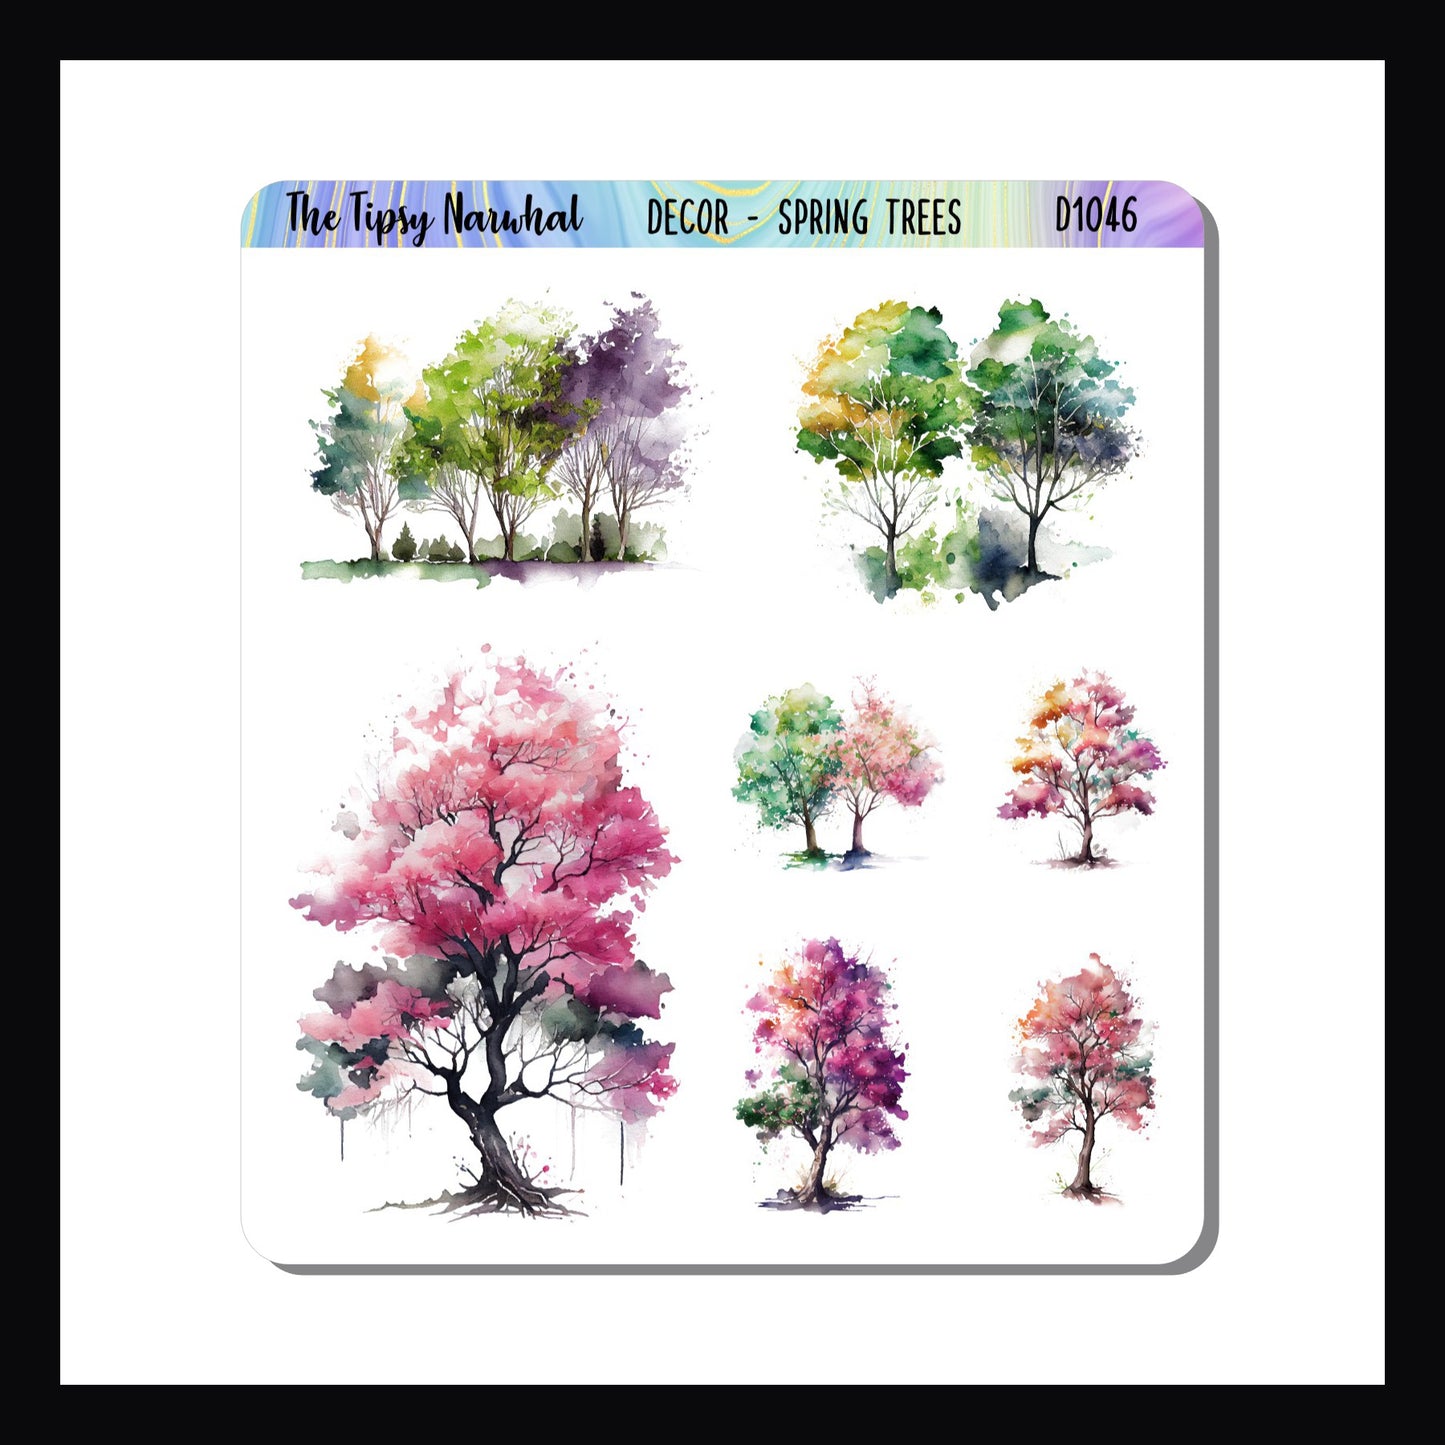 The Spring Trees Decor Sheet features 7 stickers depicting various springtime trees.  Stickers vary in size and color.